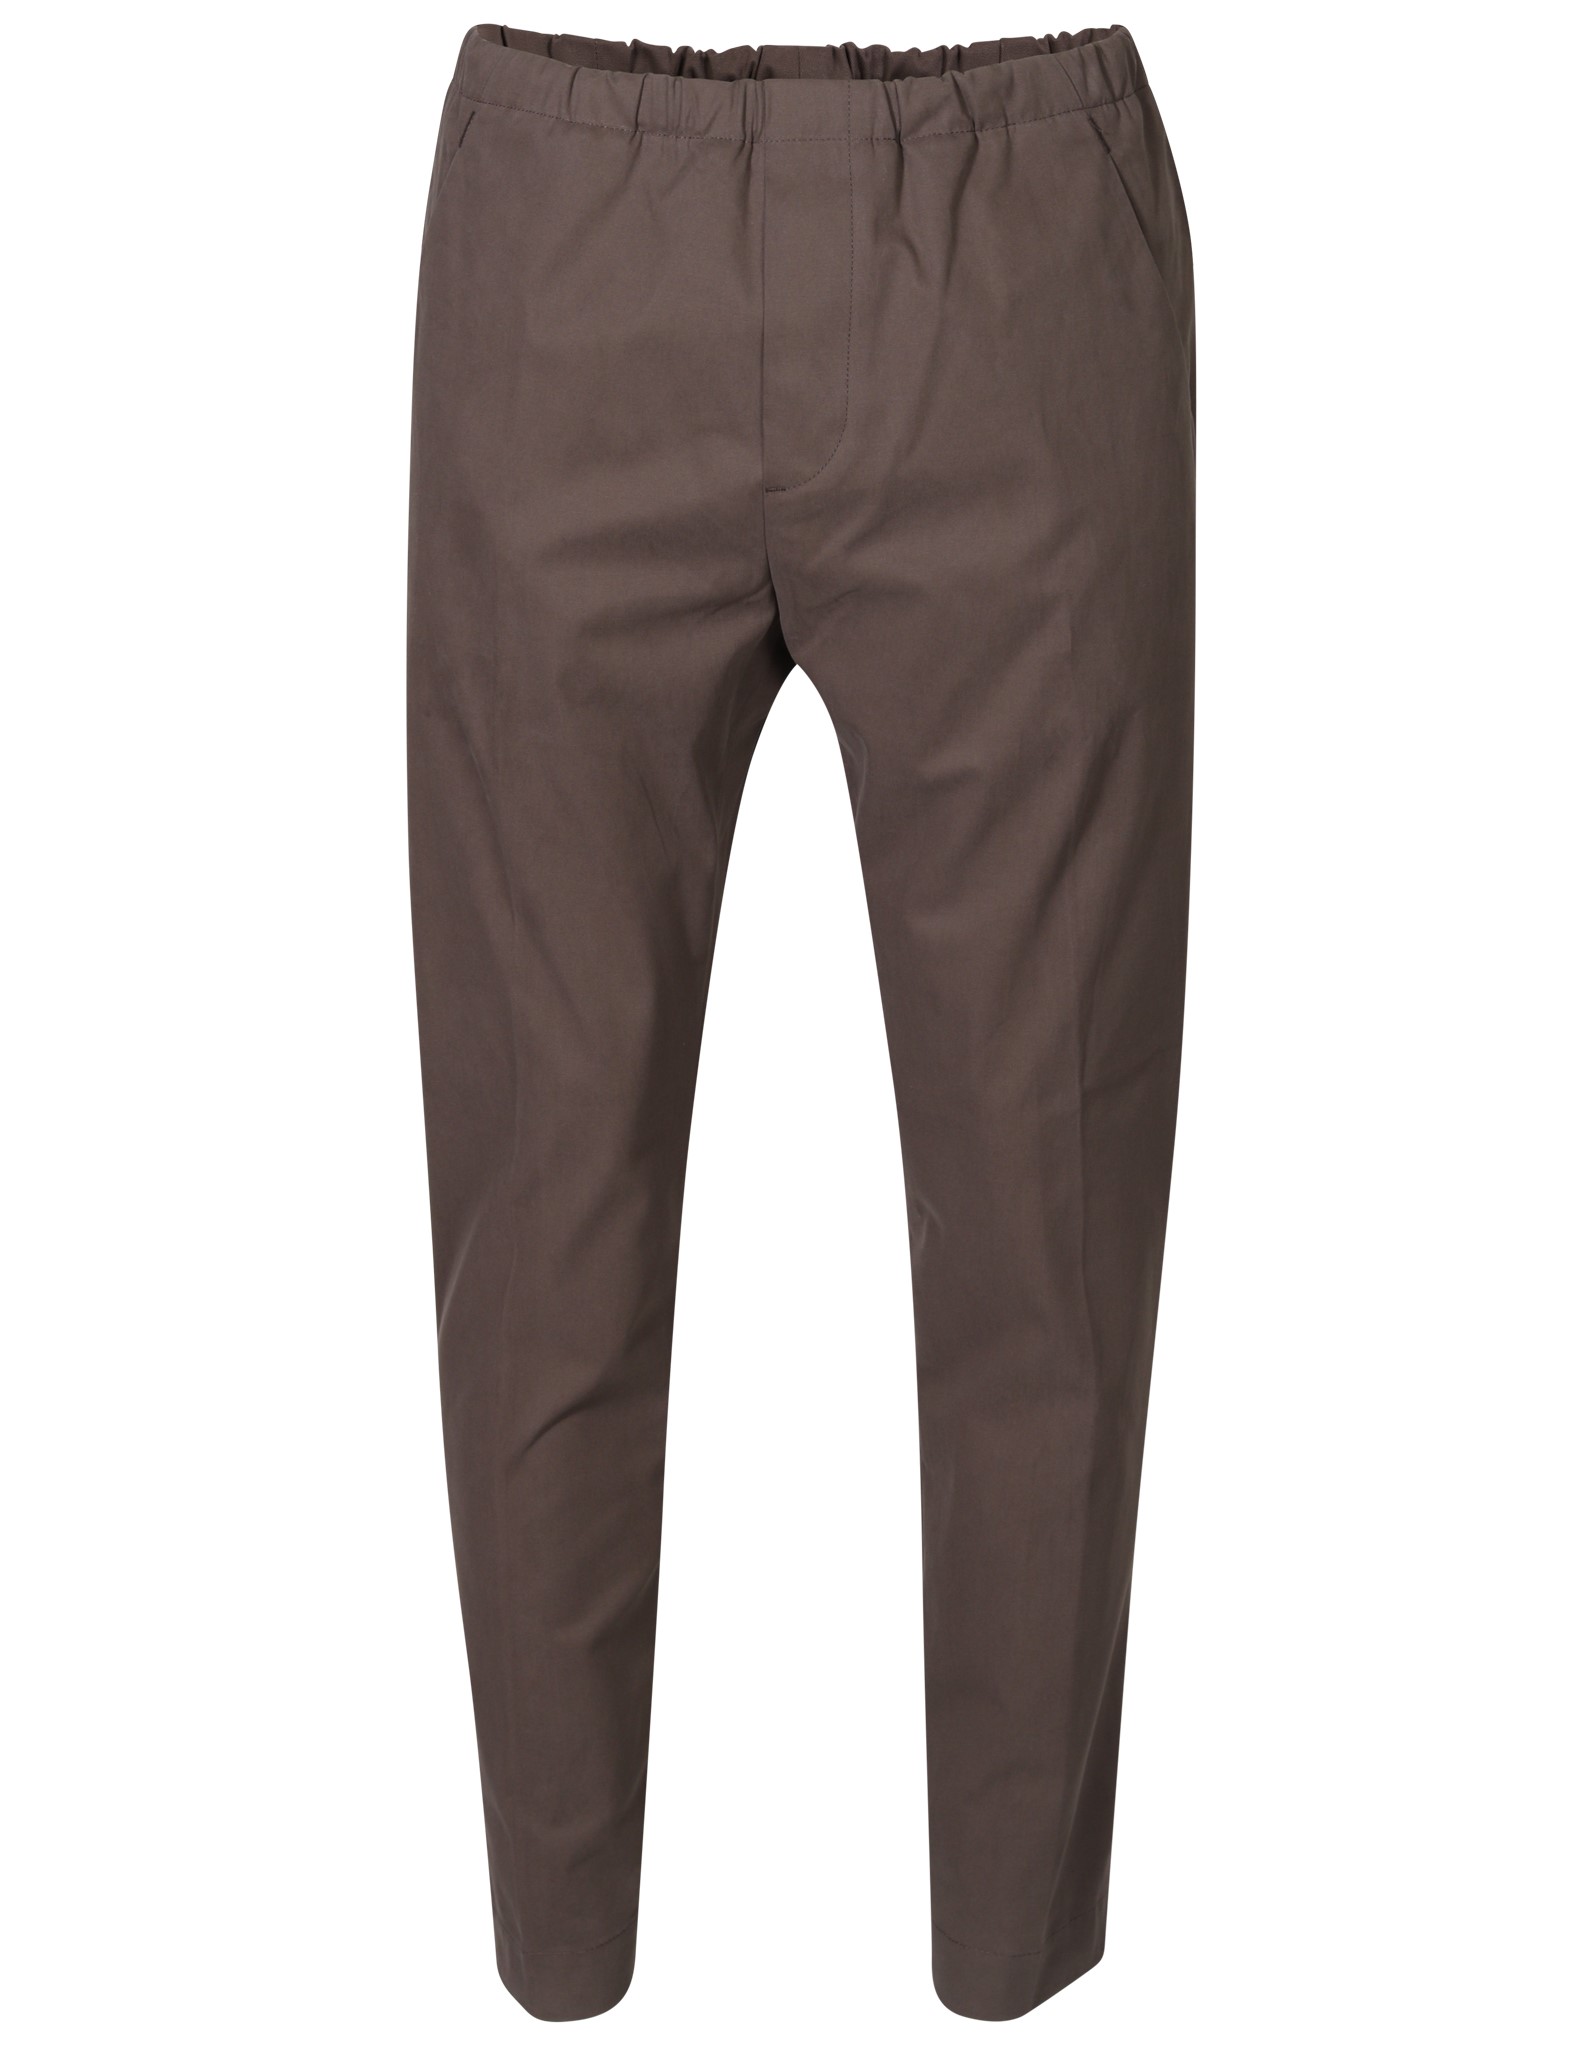 NINE:INTHE:MORNING Mirco Carrot Cotton Stretch Pant in Brown 46